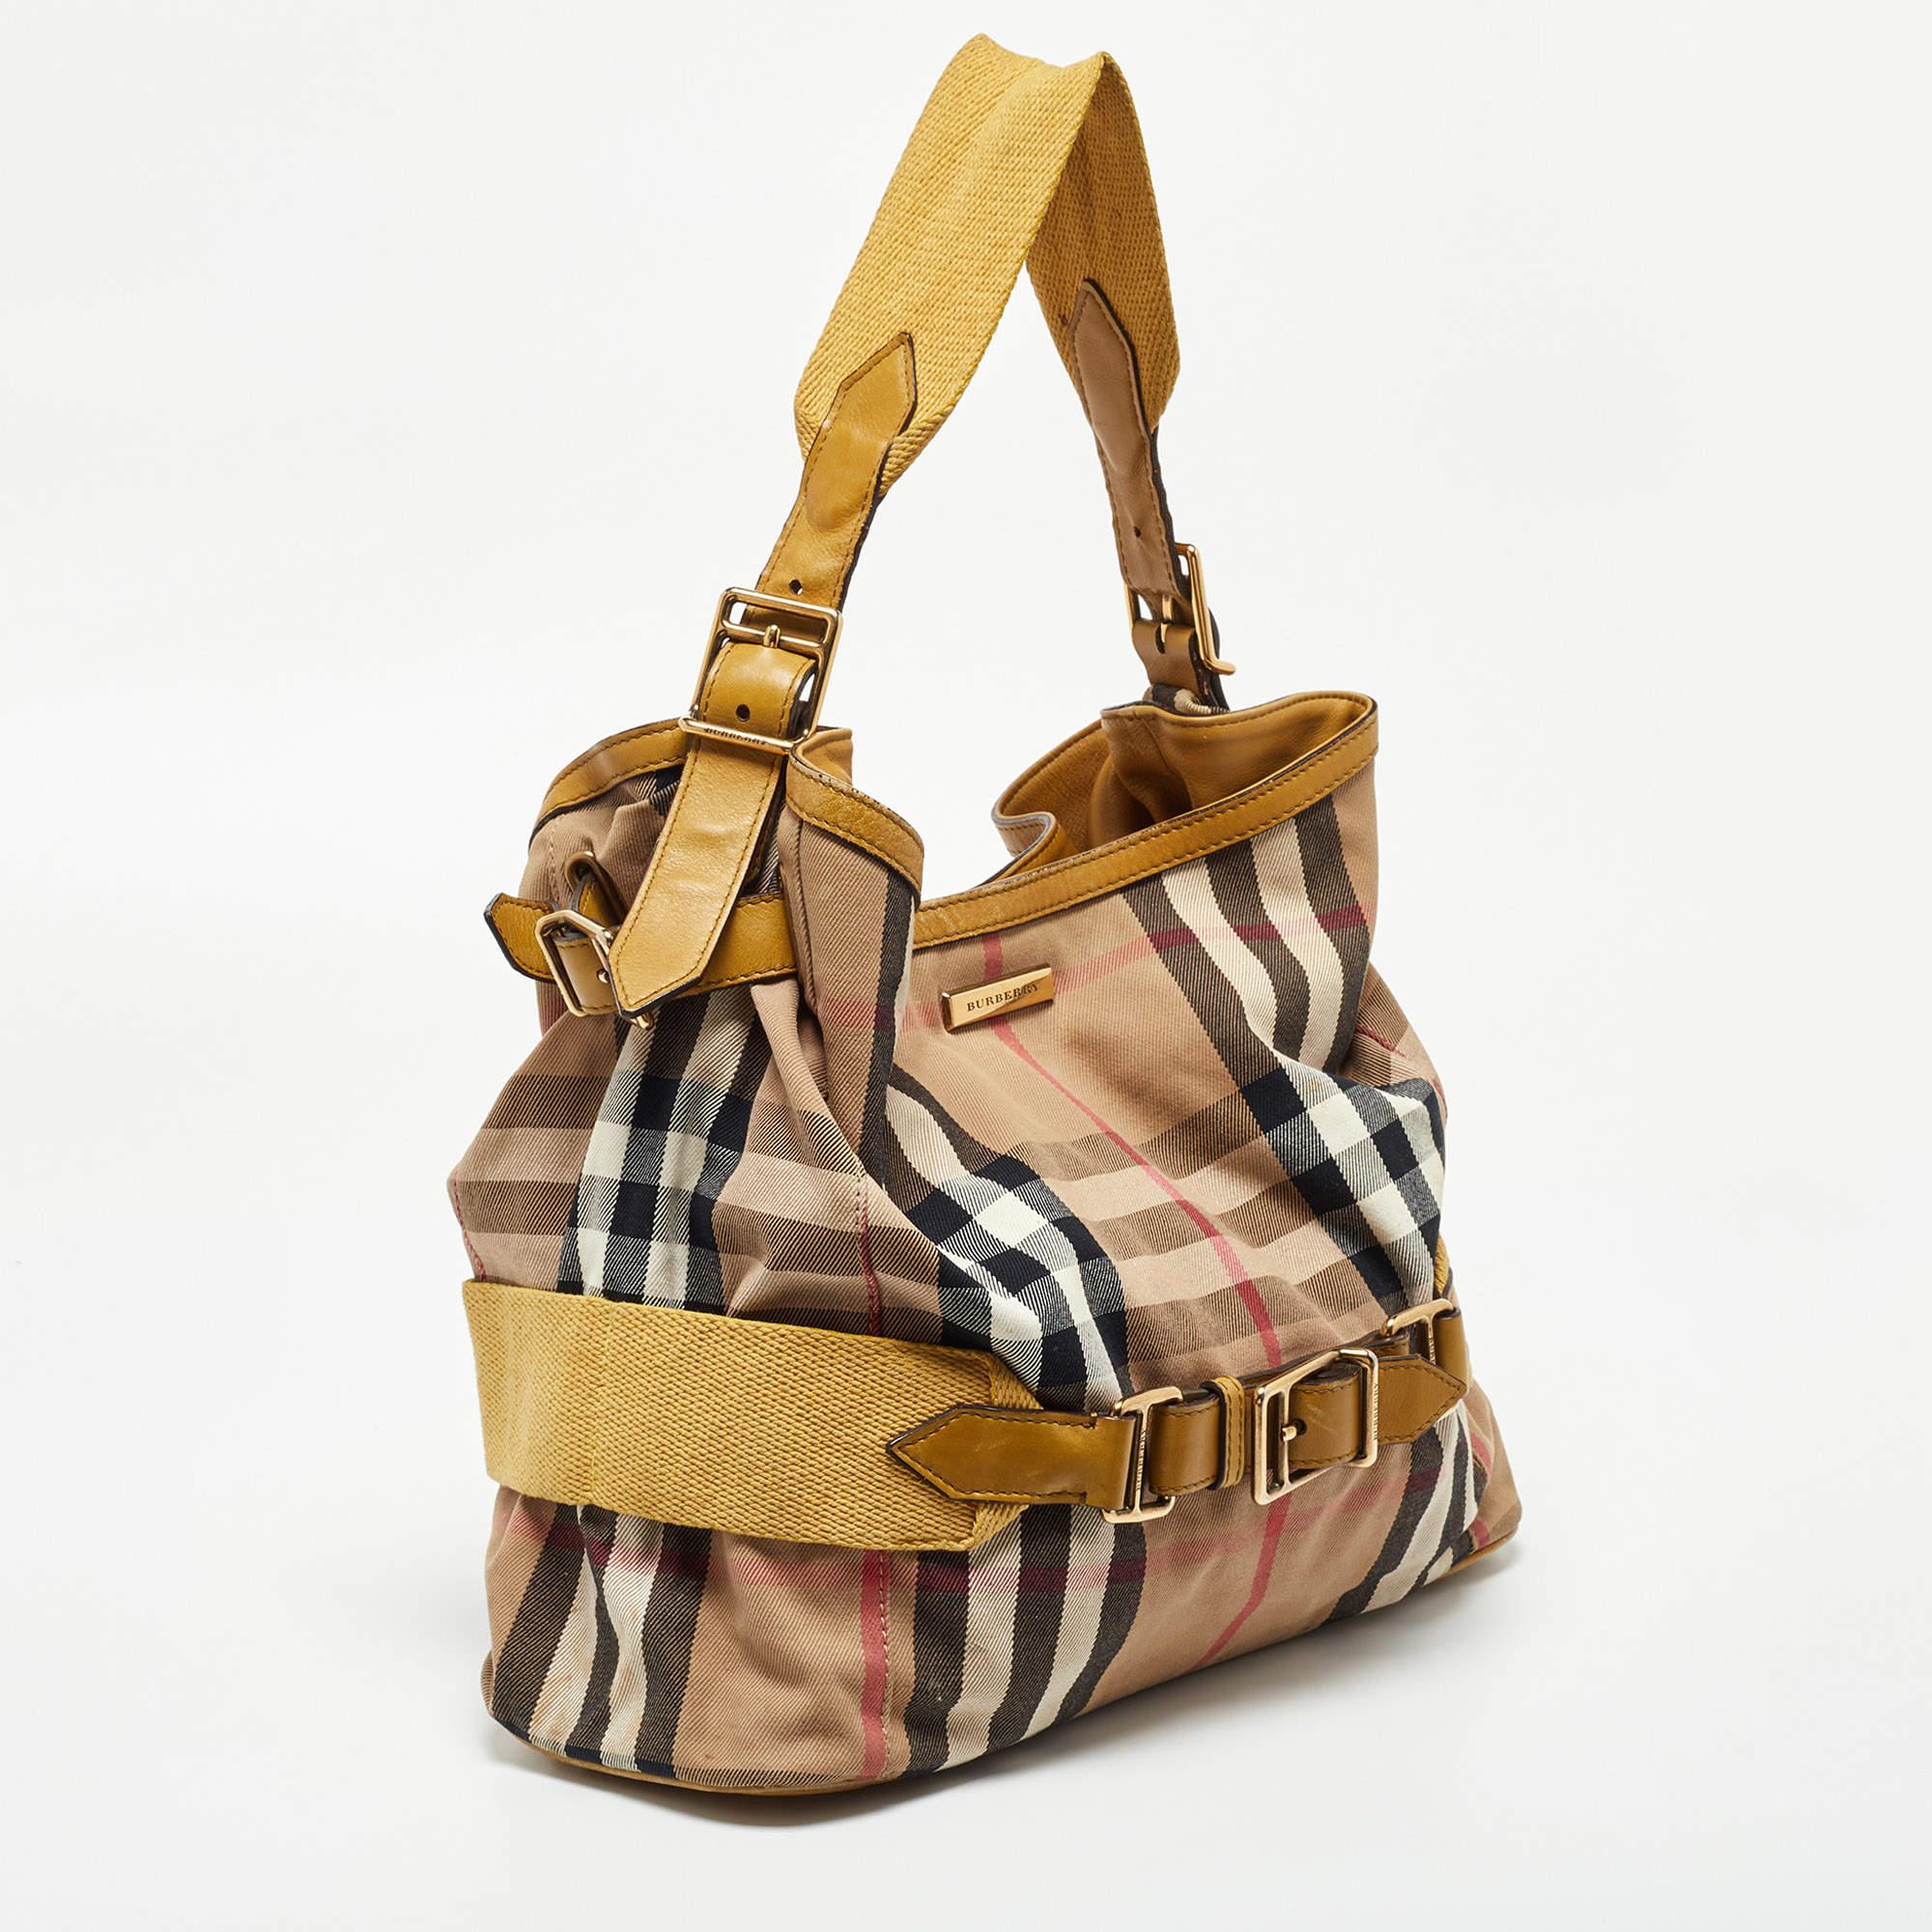 Indulge in luxury with this Burberry bag. Meticulously crafted from premium materials, it combines exquisite design, impeccable craftsmanship, and timeless elegance. Elevate your style with this fashion accessory.

